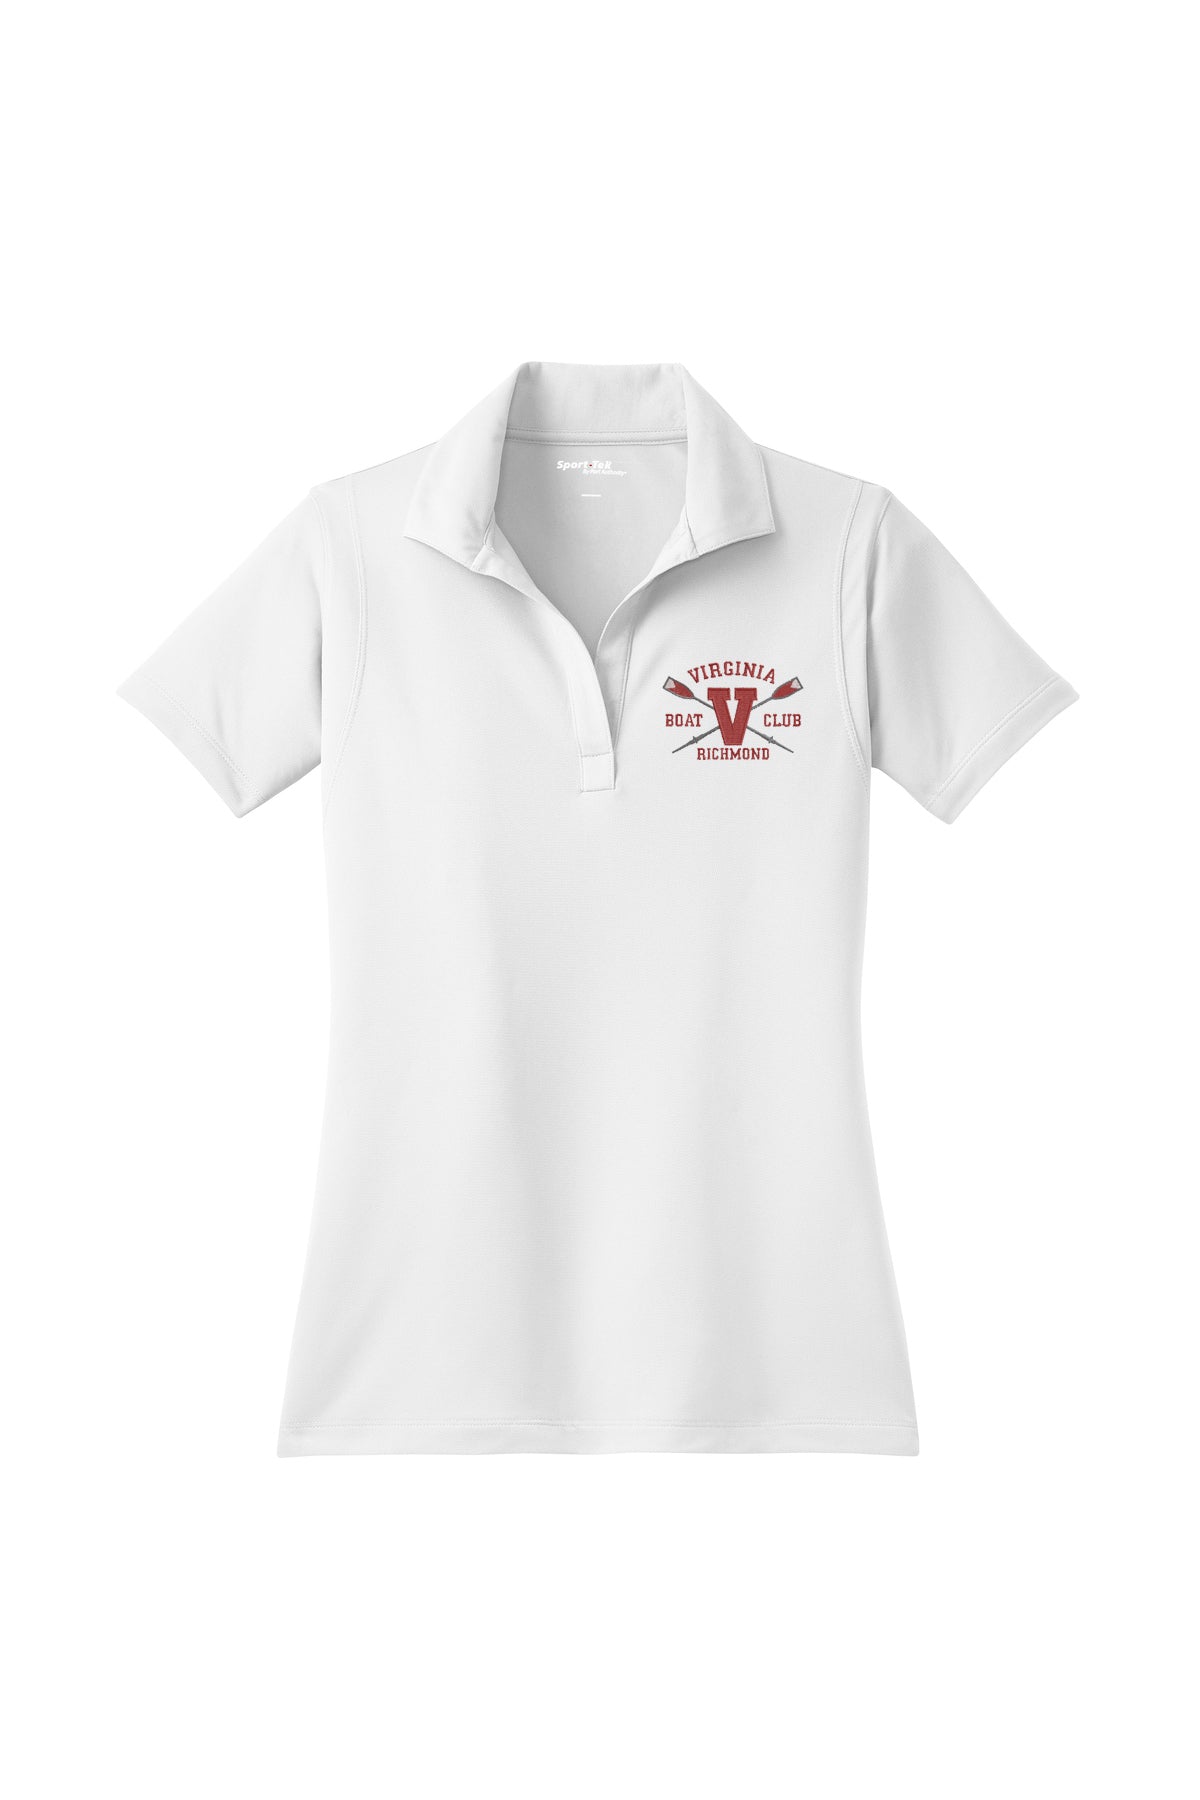 Virginia Boat Club Embroidered Performance Ladies Polo